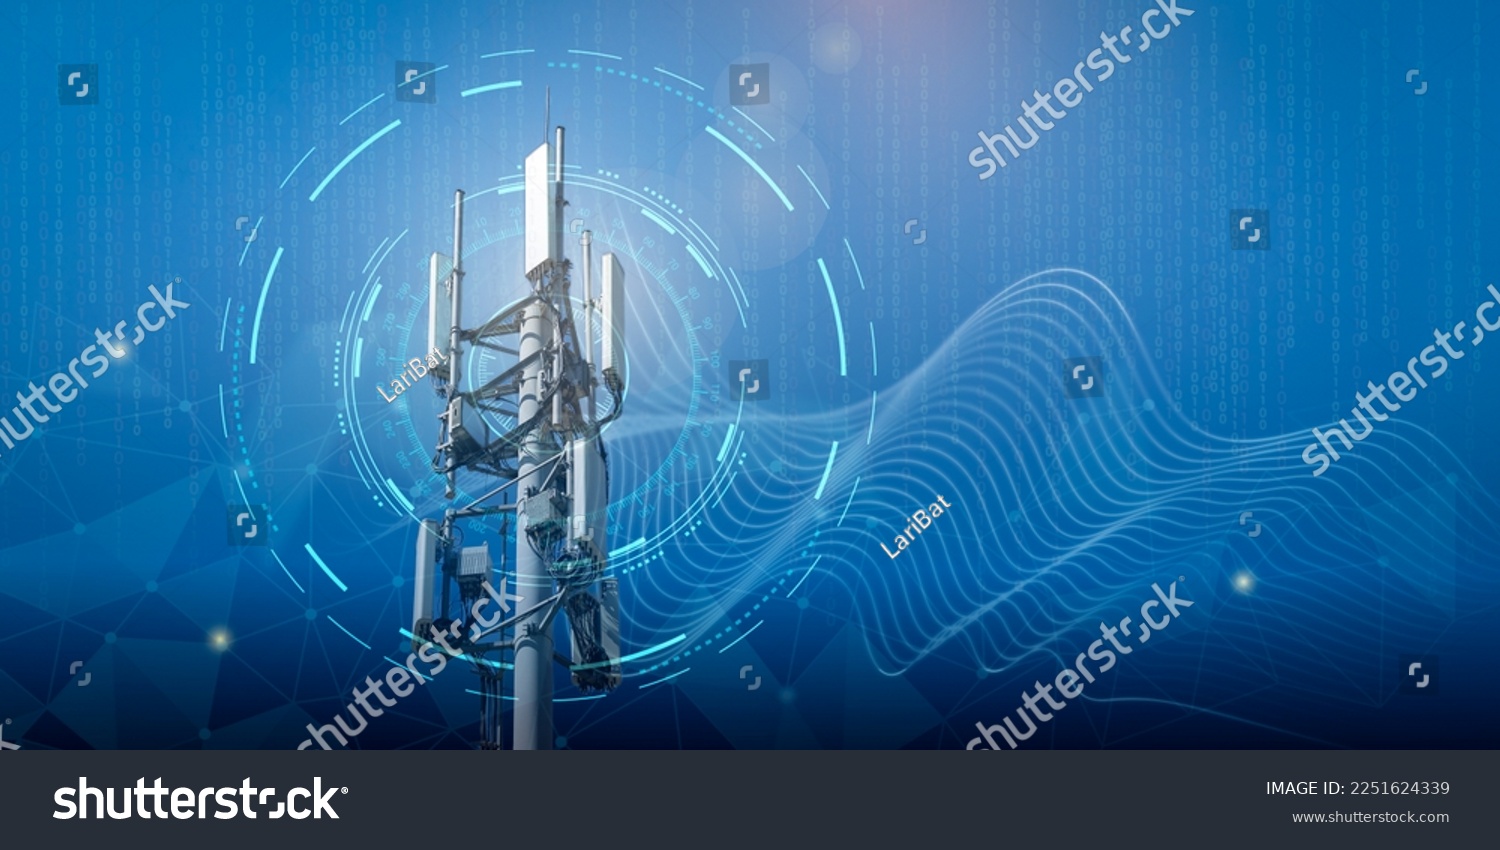 Telecommunication tower with 4G, 5G transmitters. Cellular base station with transmitting antennas on a telecommunication tower on a technological background with abstract waves #2251624339